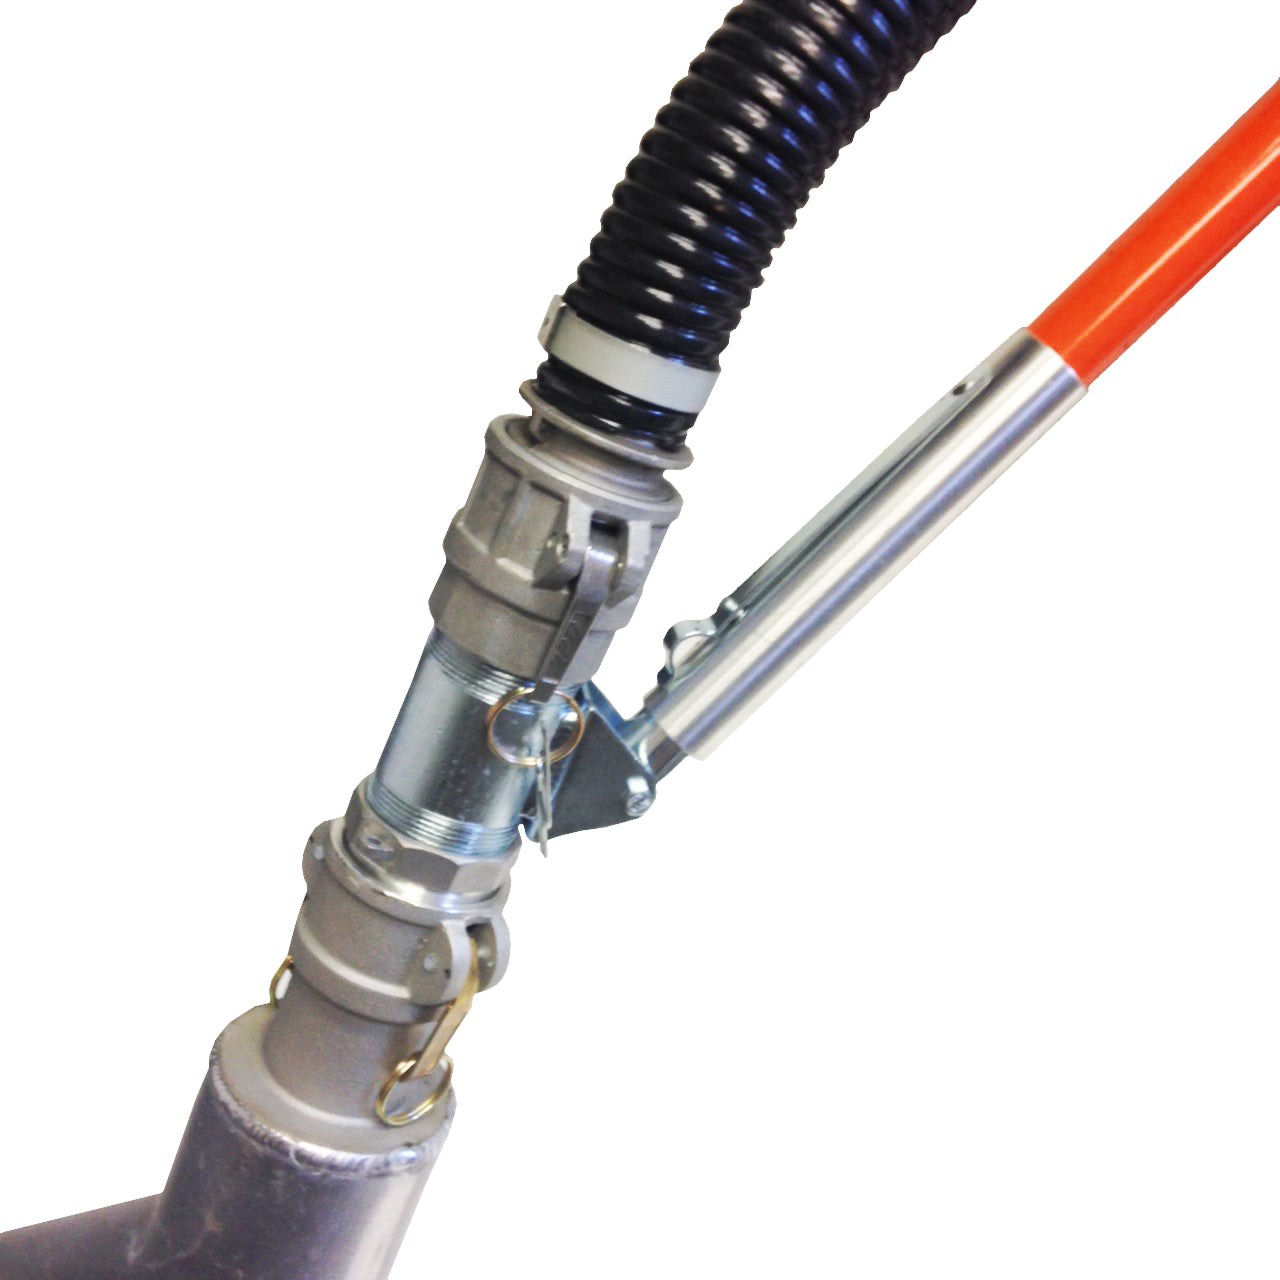 Cam-Lock Hose adapter for sewer cleaning